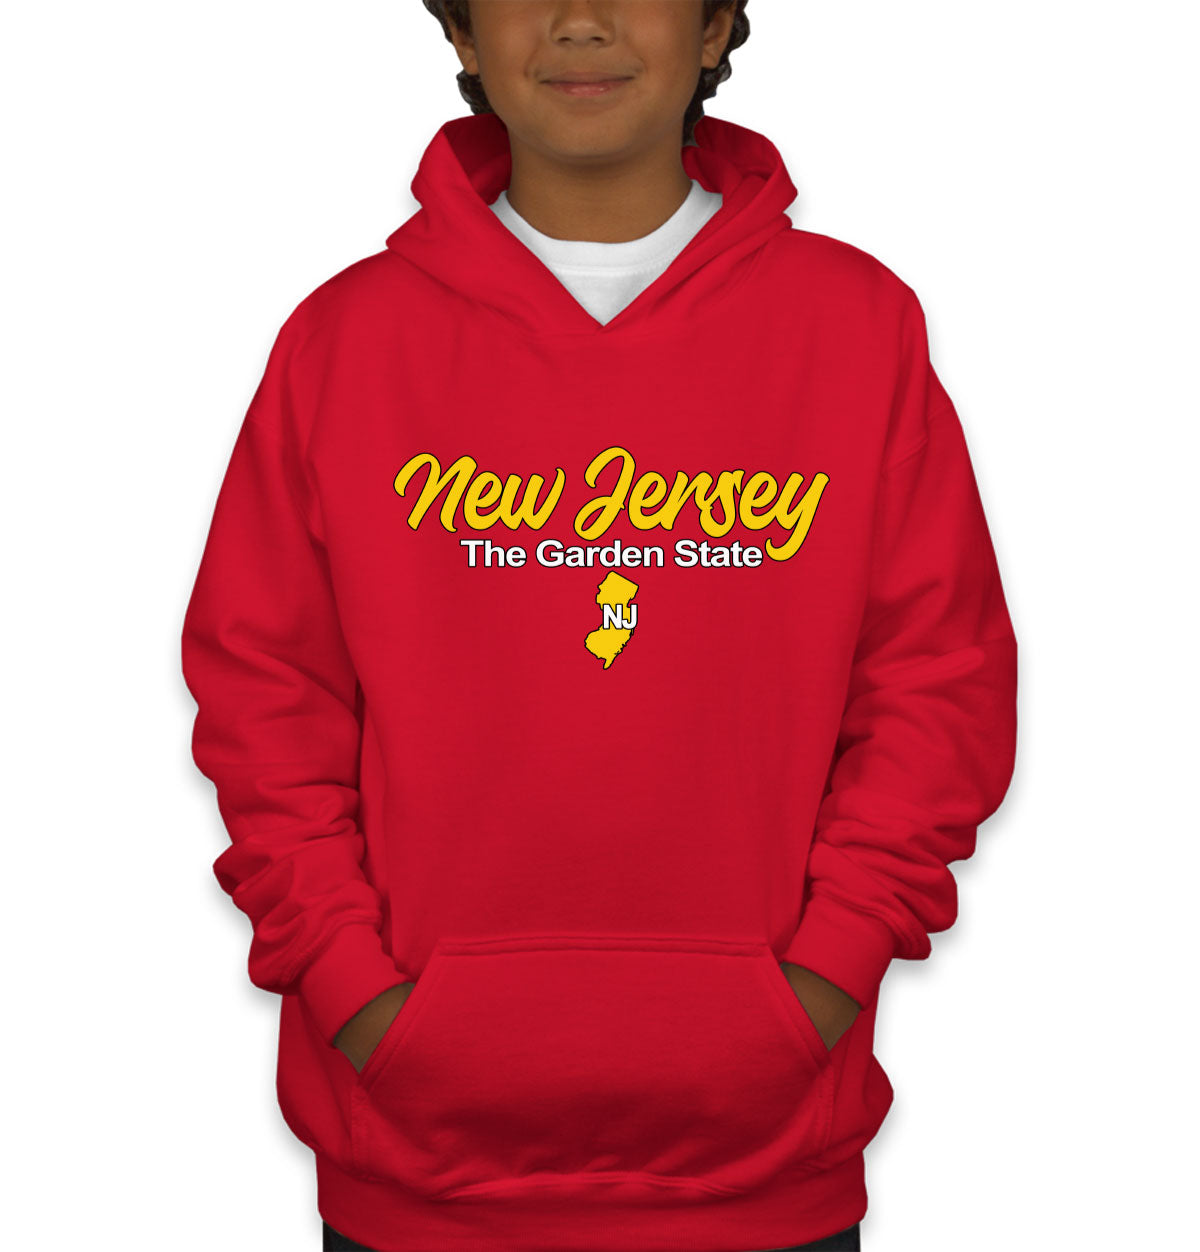 New Jersey The Garden State Youth Hoodie